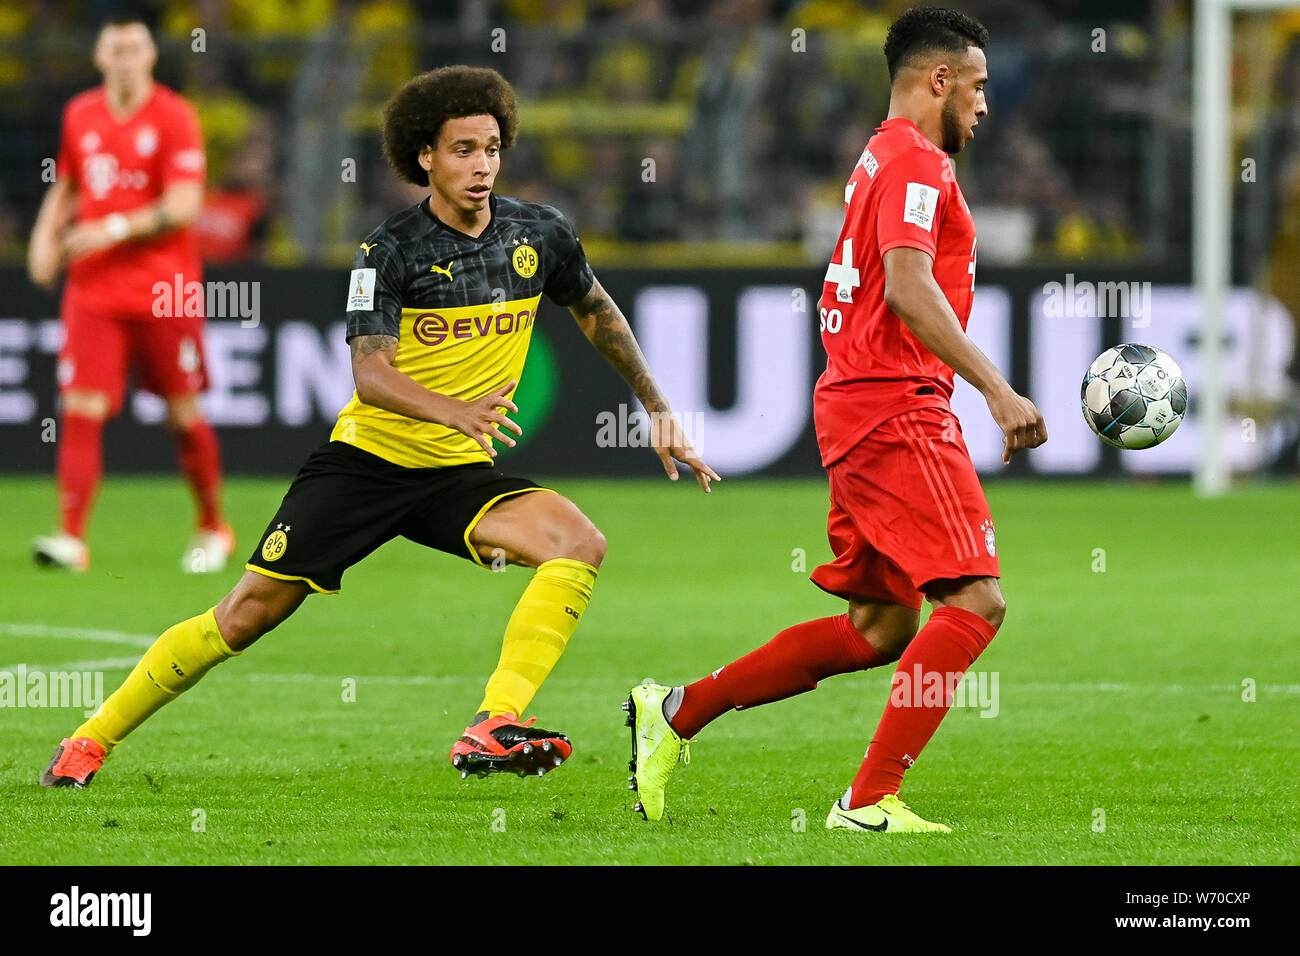 Axel Witsel from Borussia Dortmund (L) and Corentin Tolisso from Bayern Munich (R) are seen in action during the Germany Supercup Final 2019 match between Borussia Dortmund and Bayern Munich.(Final score: Borussia Dortmund 2:0 Bayern Munich) Stock Photo